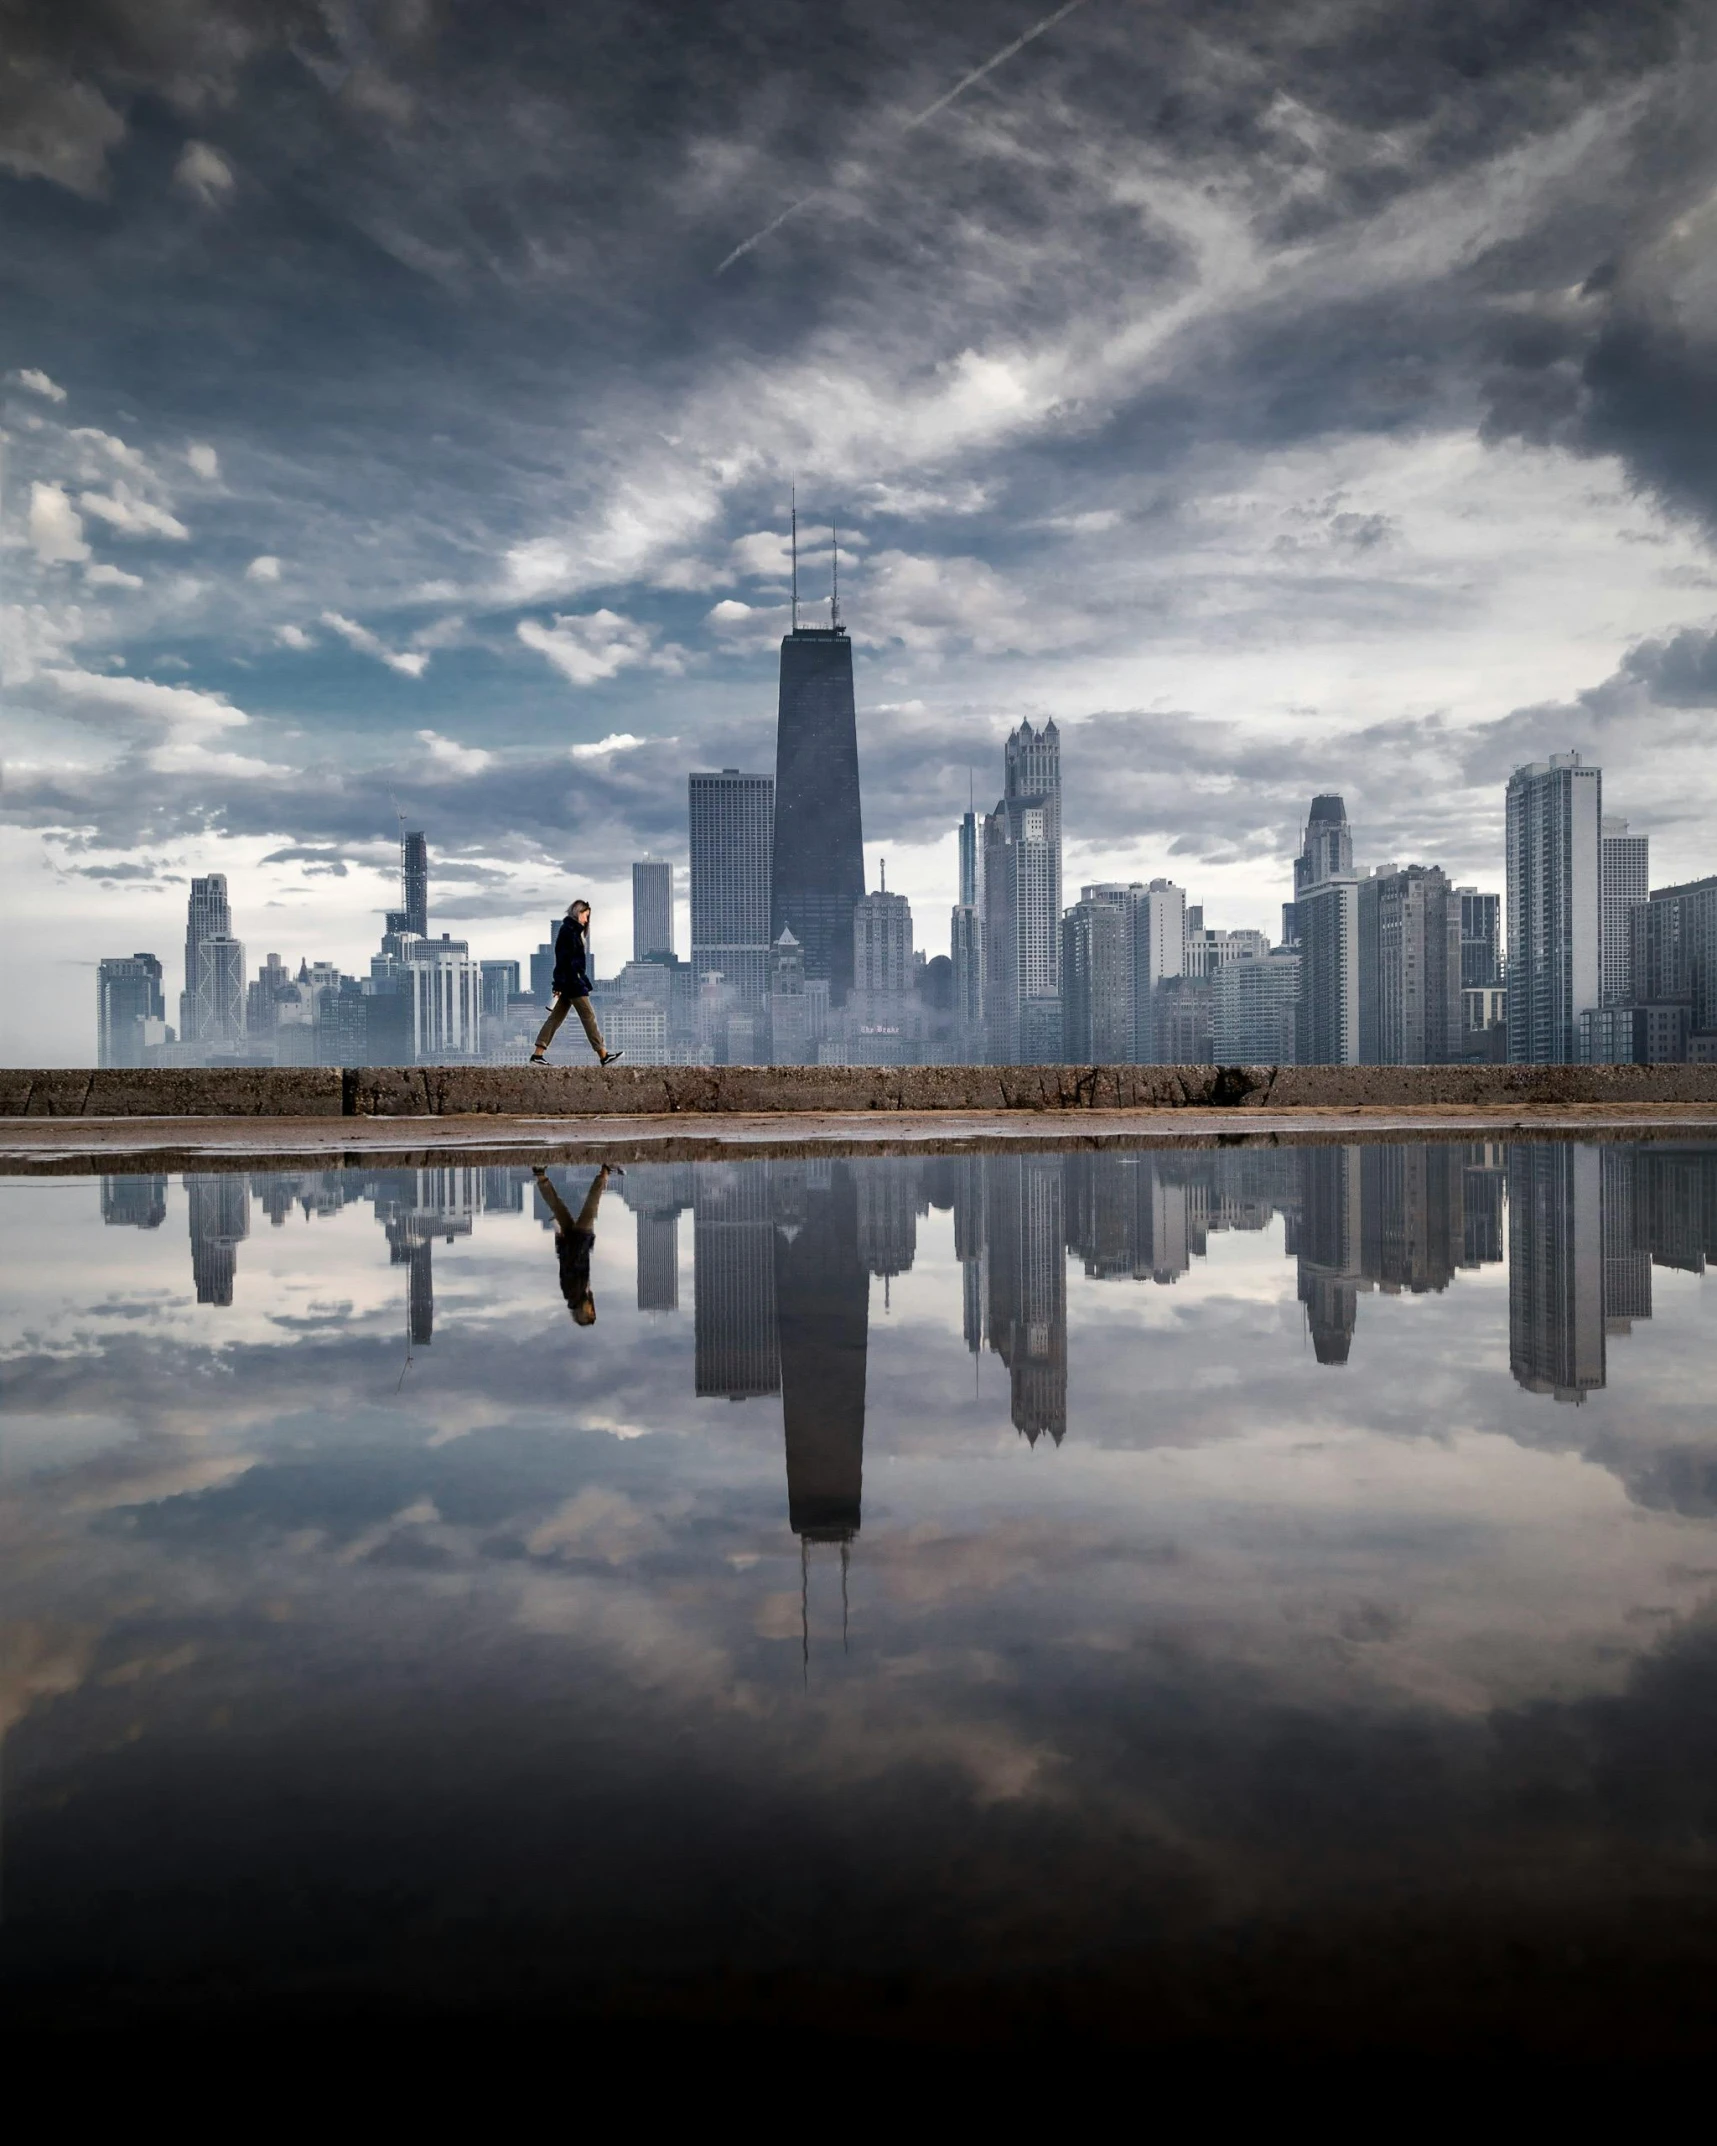 a person walking in front of a body of water with a city in the background, by Erik Pevernagie, art photography, chicago, skies, viral image, 5 0 0 px